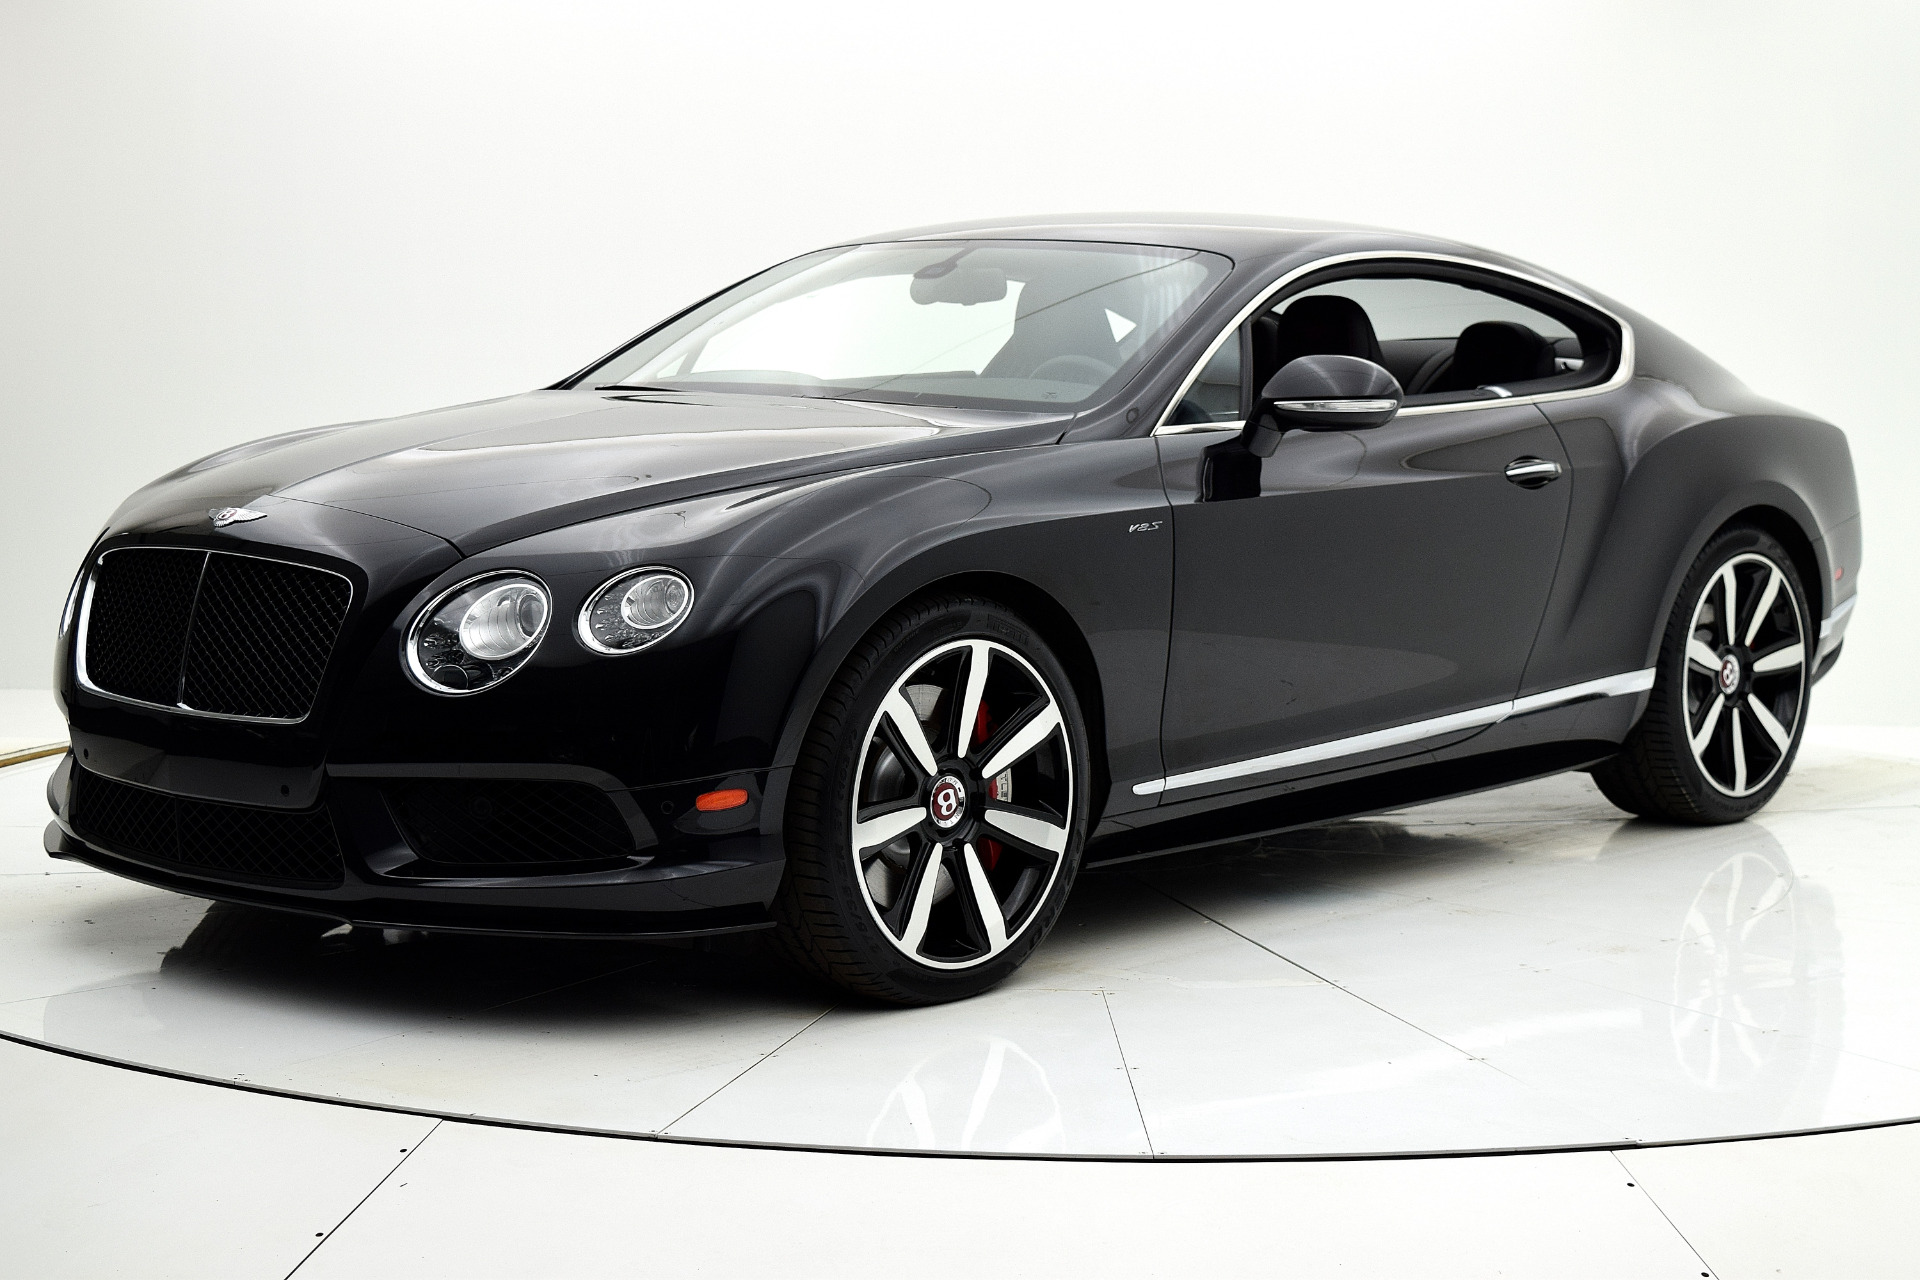 Used 2014 Bentley Continental GT V8 S Coupe for sale Sold at Bentley Palmyra N.J. in Palmyra NJ 08065 2